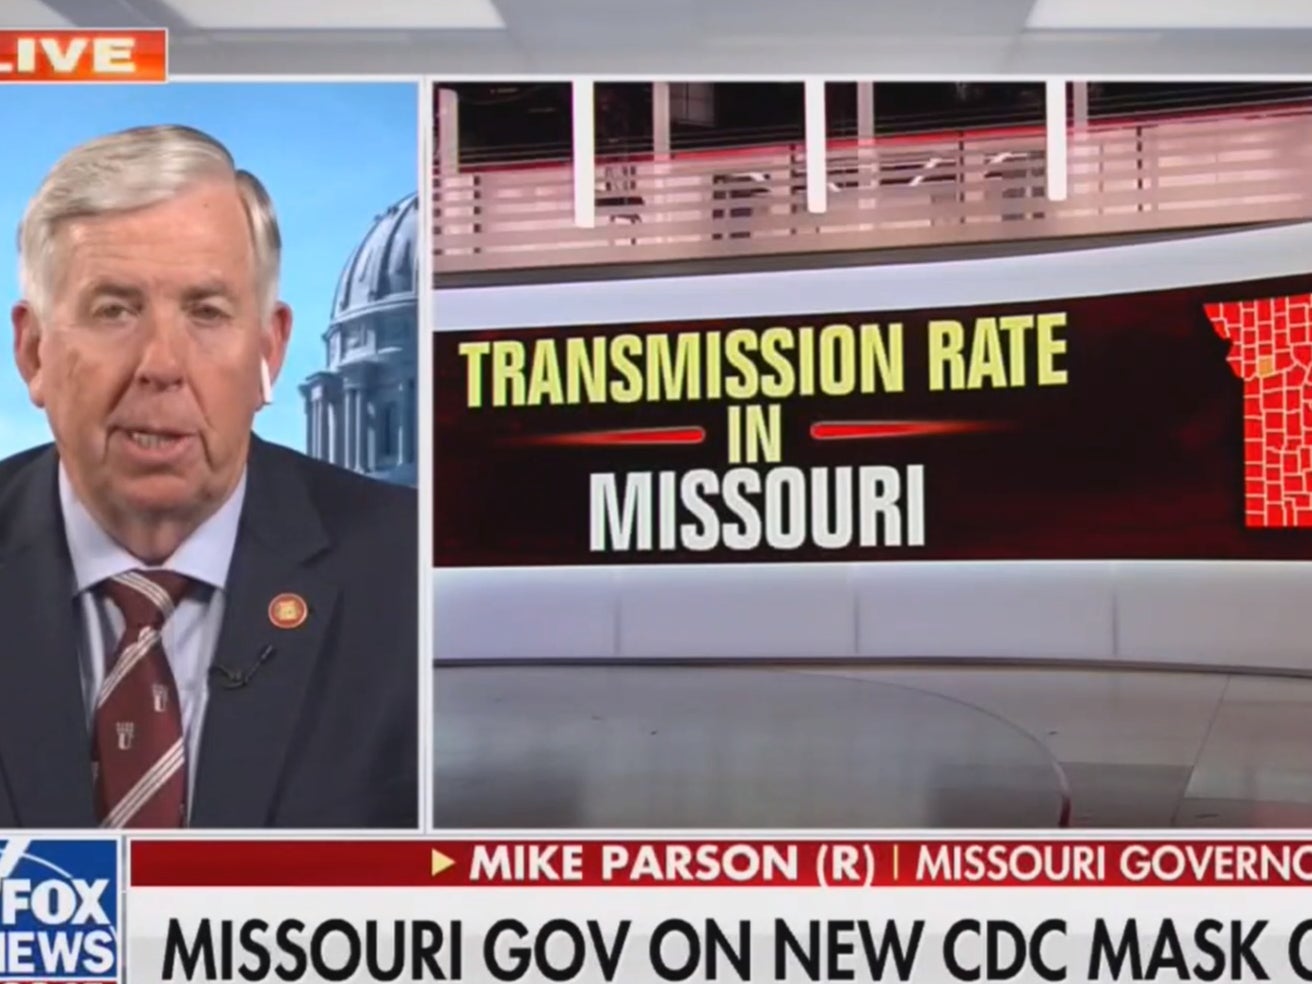 Missouri Governor Mike Parsons says there will be no new mask mandates even though virtually his entire state has high transmission rates